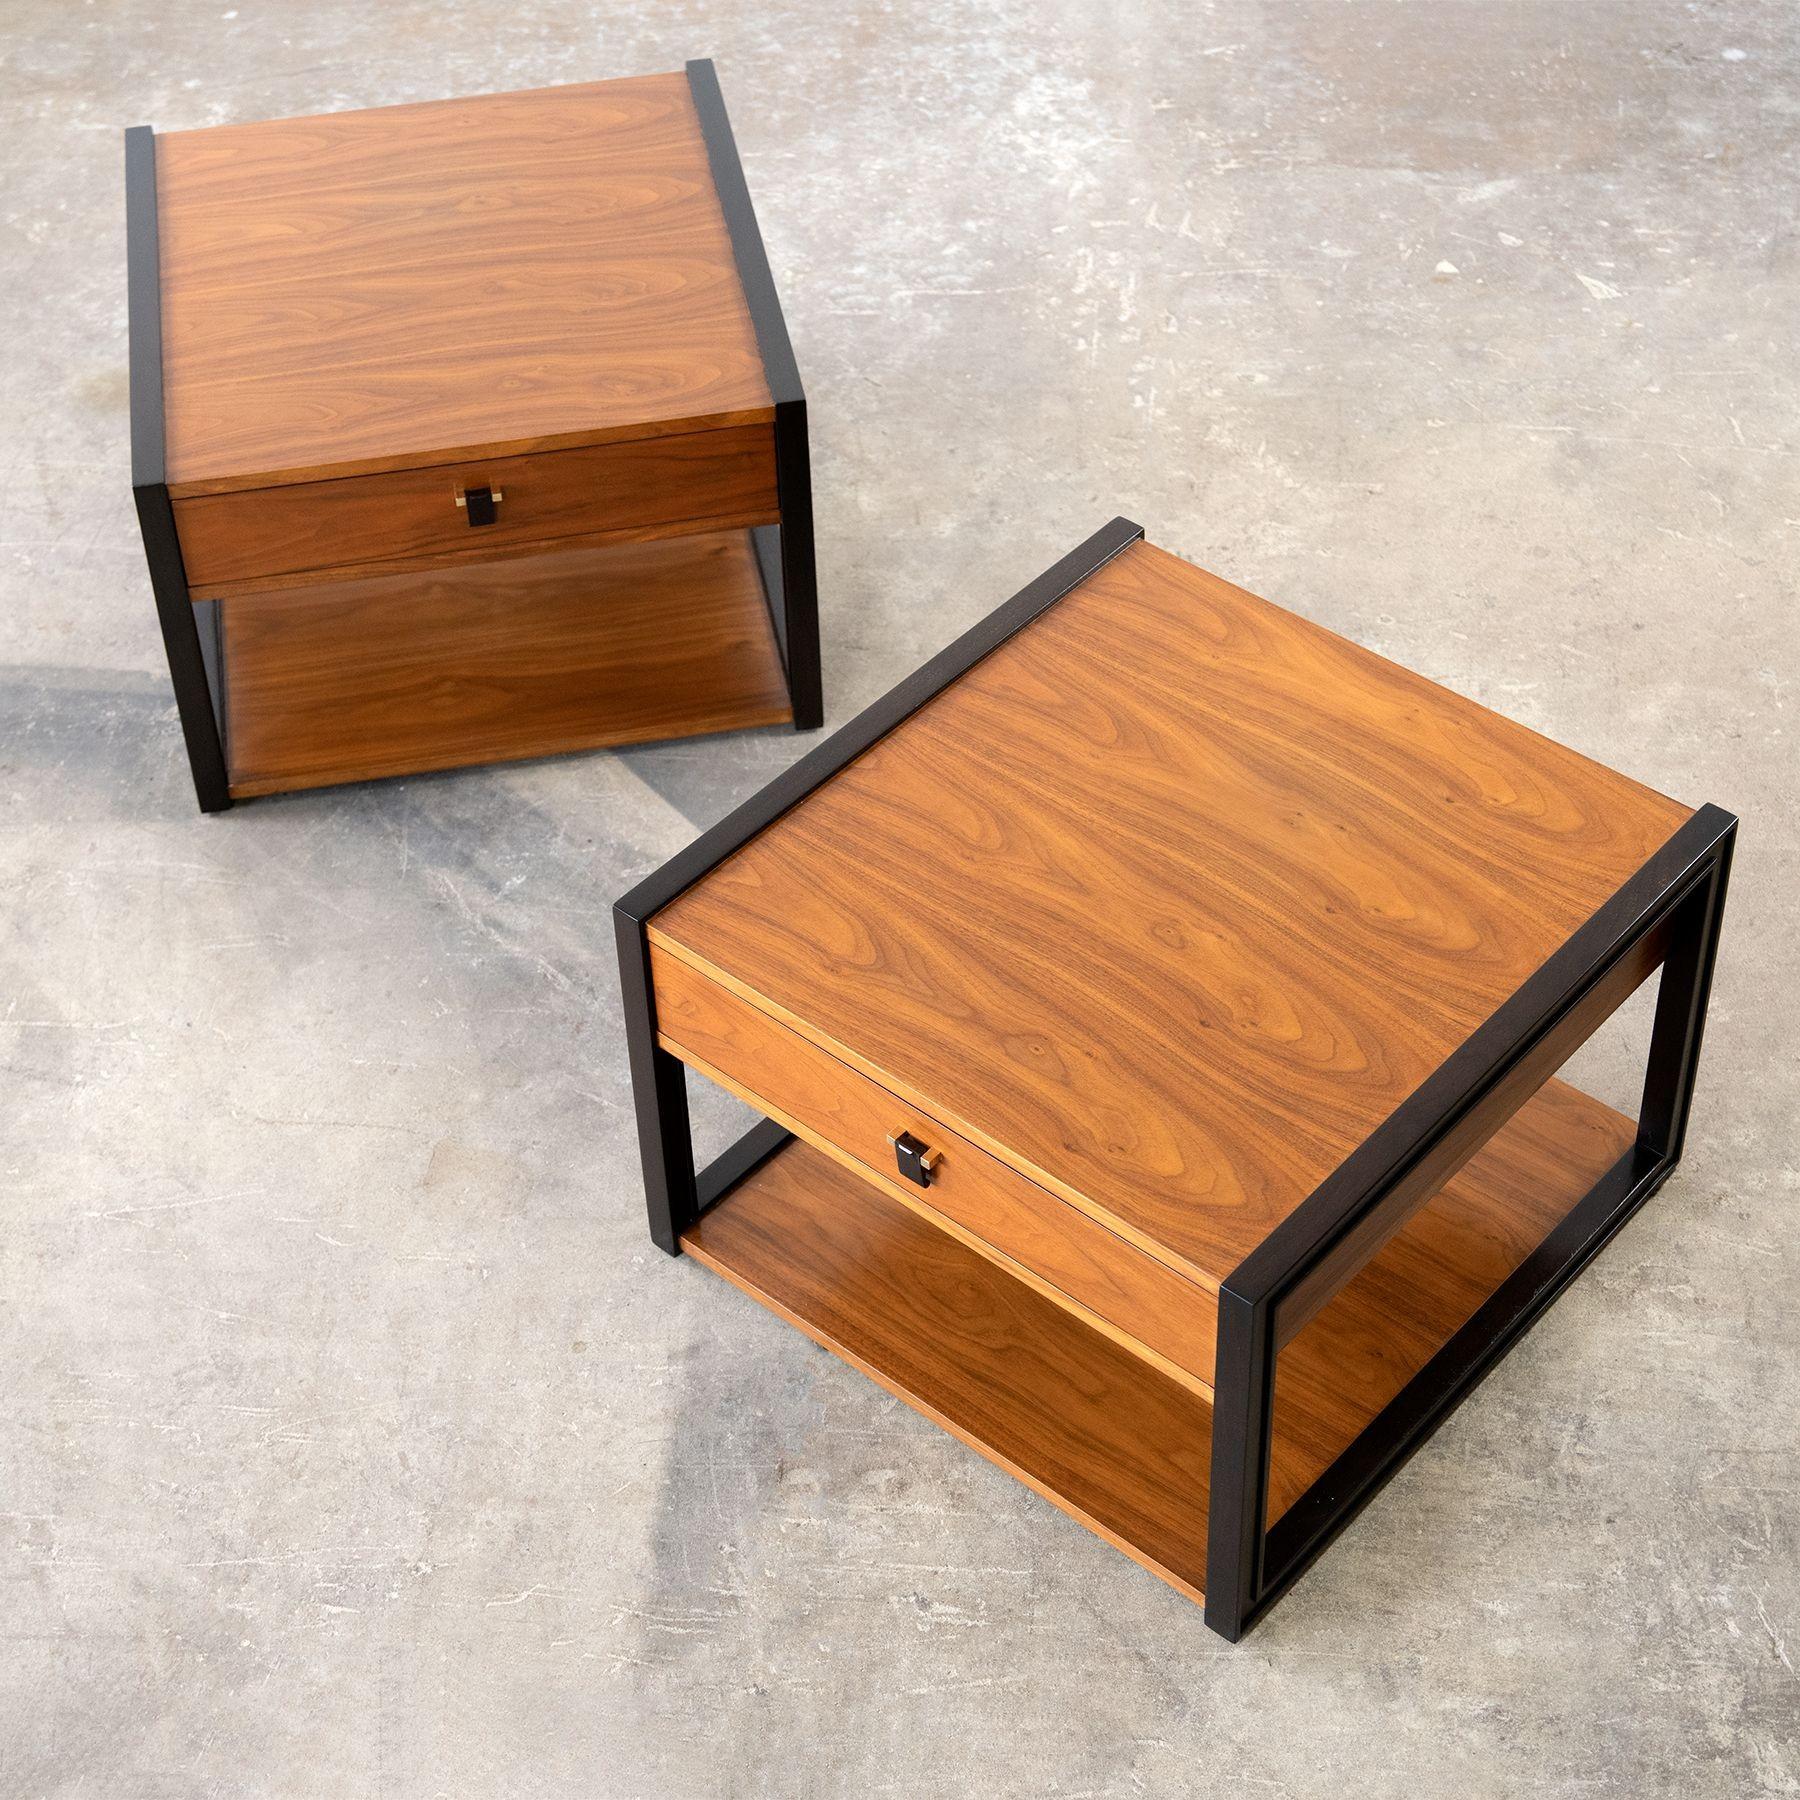 These extraordinarily beautiful and generously proportioned nightstands were designed by Edward Wormley for Dunbar and manufactured in the 1960s.
Bookmatched American walnut woodgrain drawer floating between two espresso colored mahogany frames.